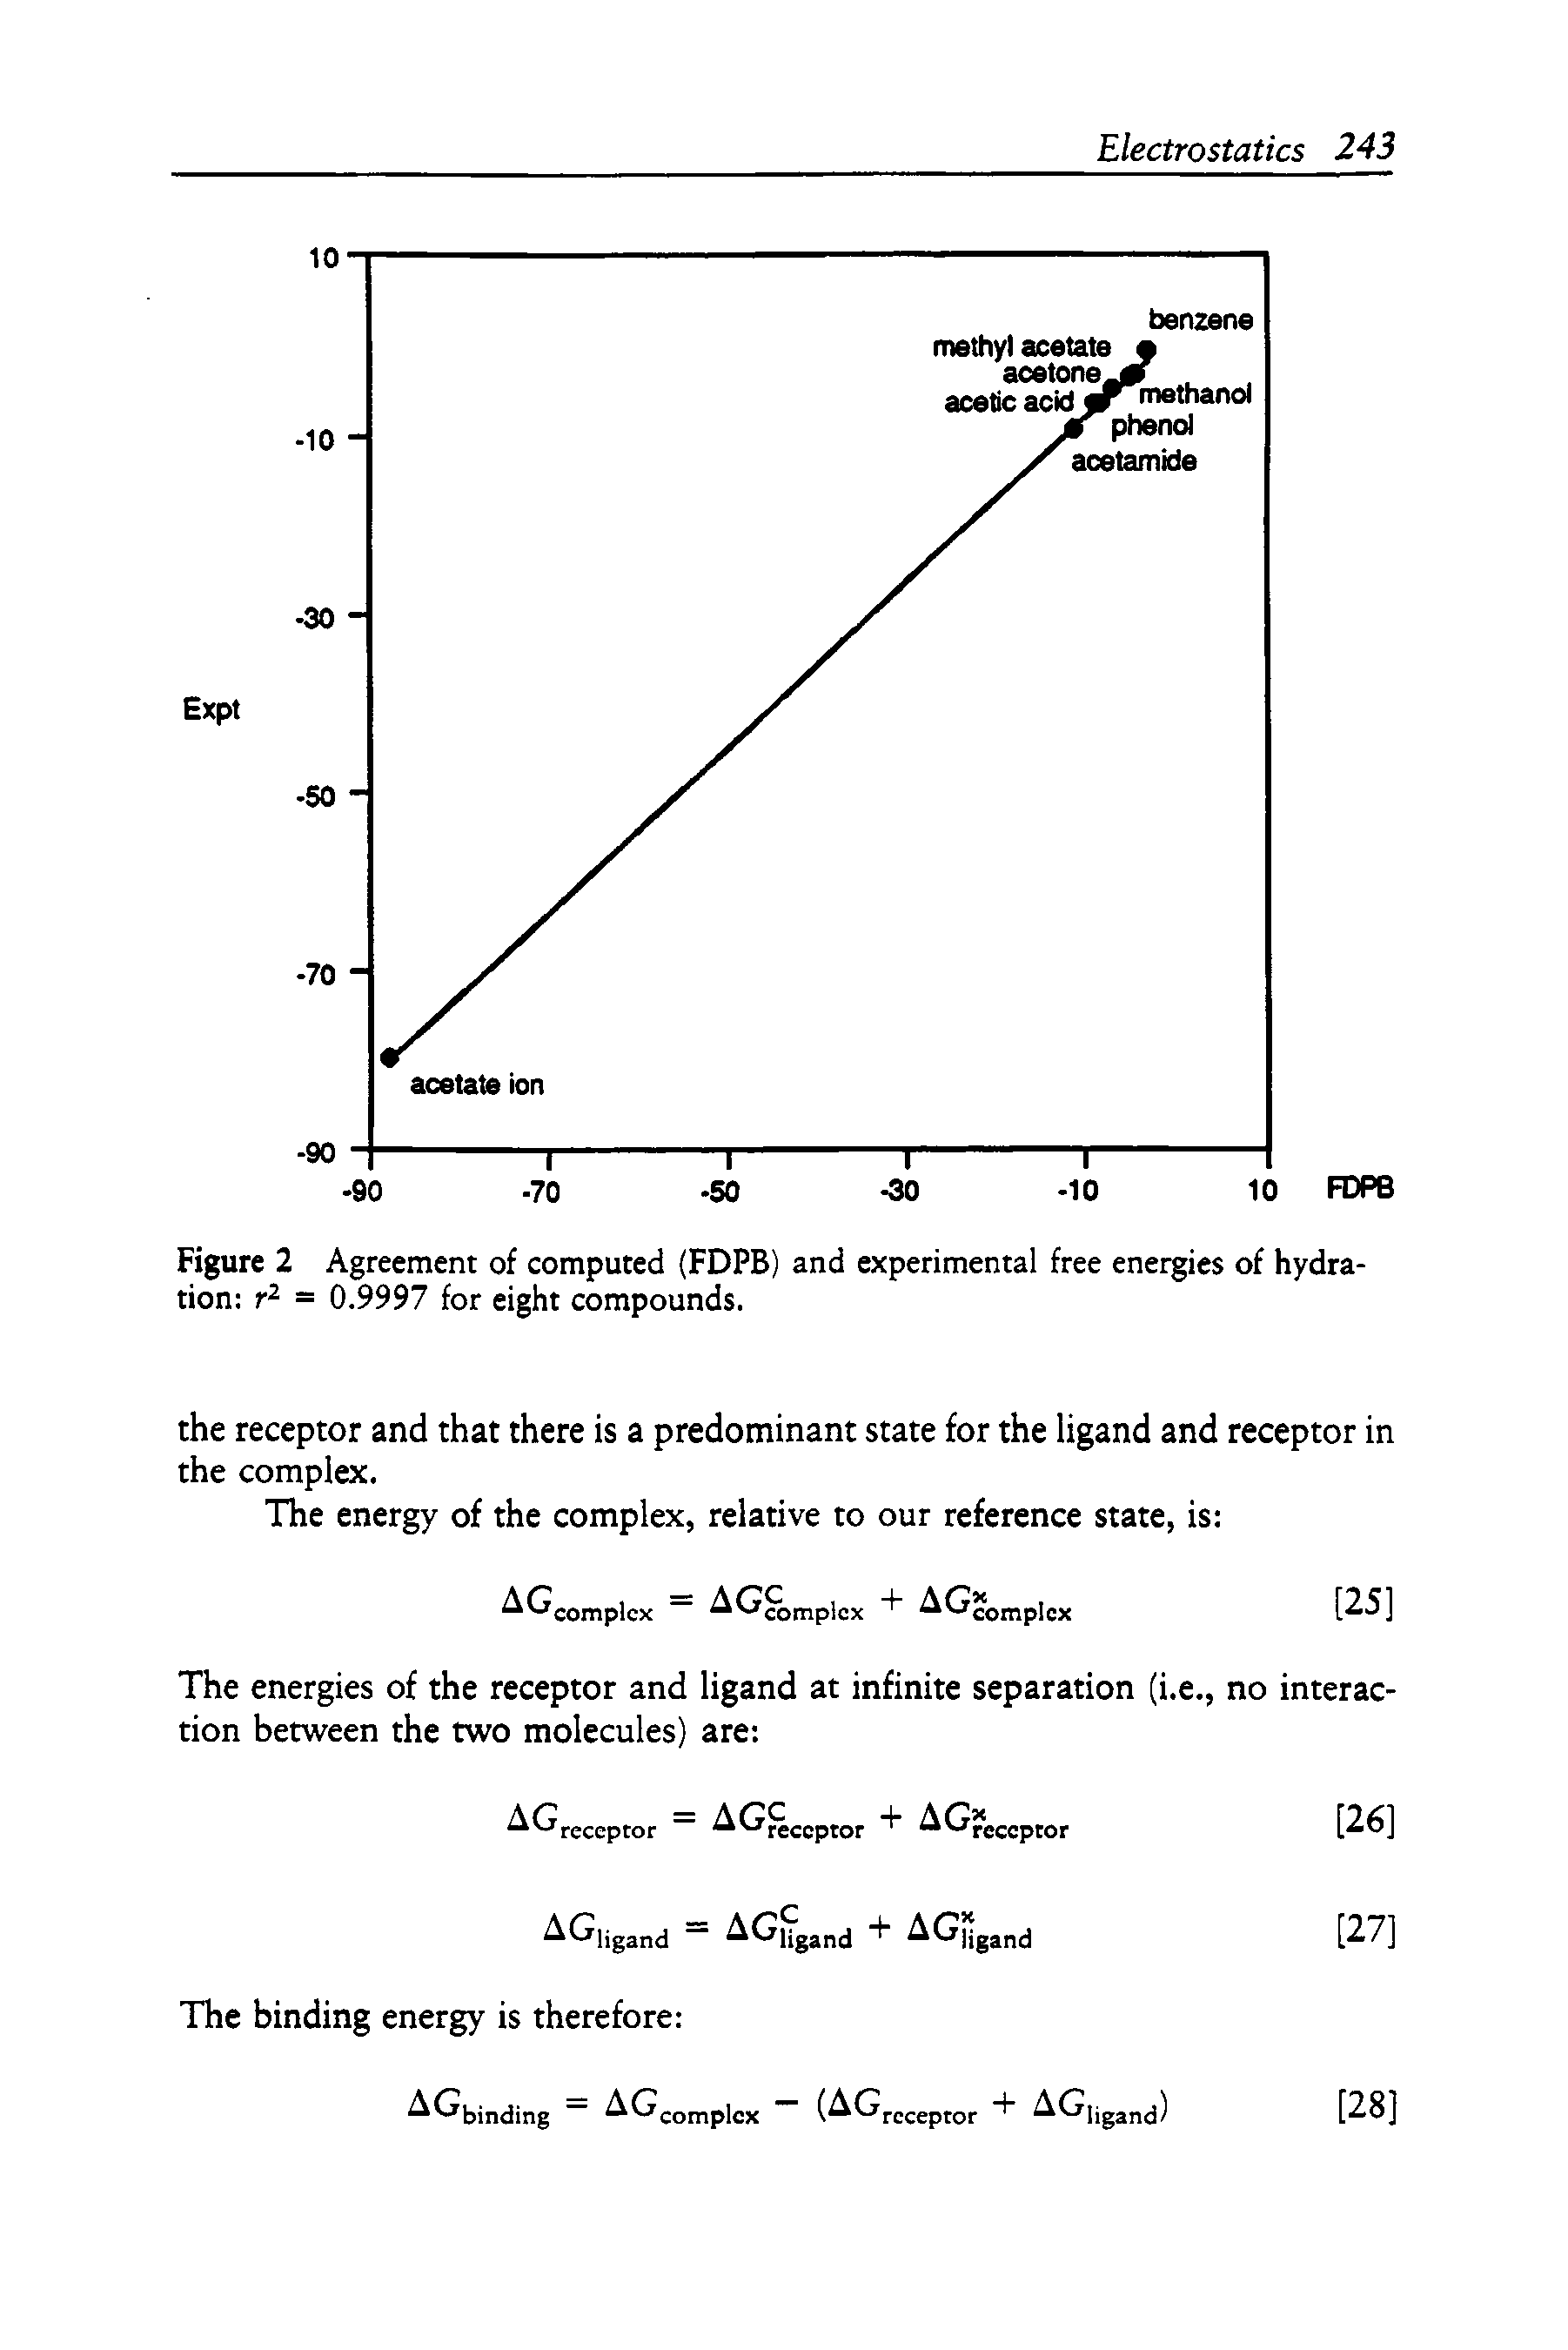 Figure 2 Agreement of computed (FDPB) and experimental free energies of hydration = 0.9997 for eight compounds.